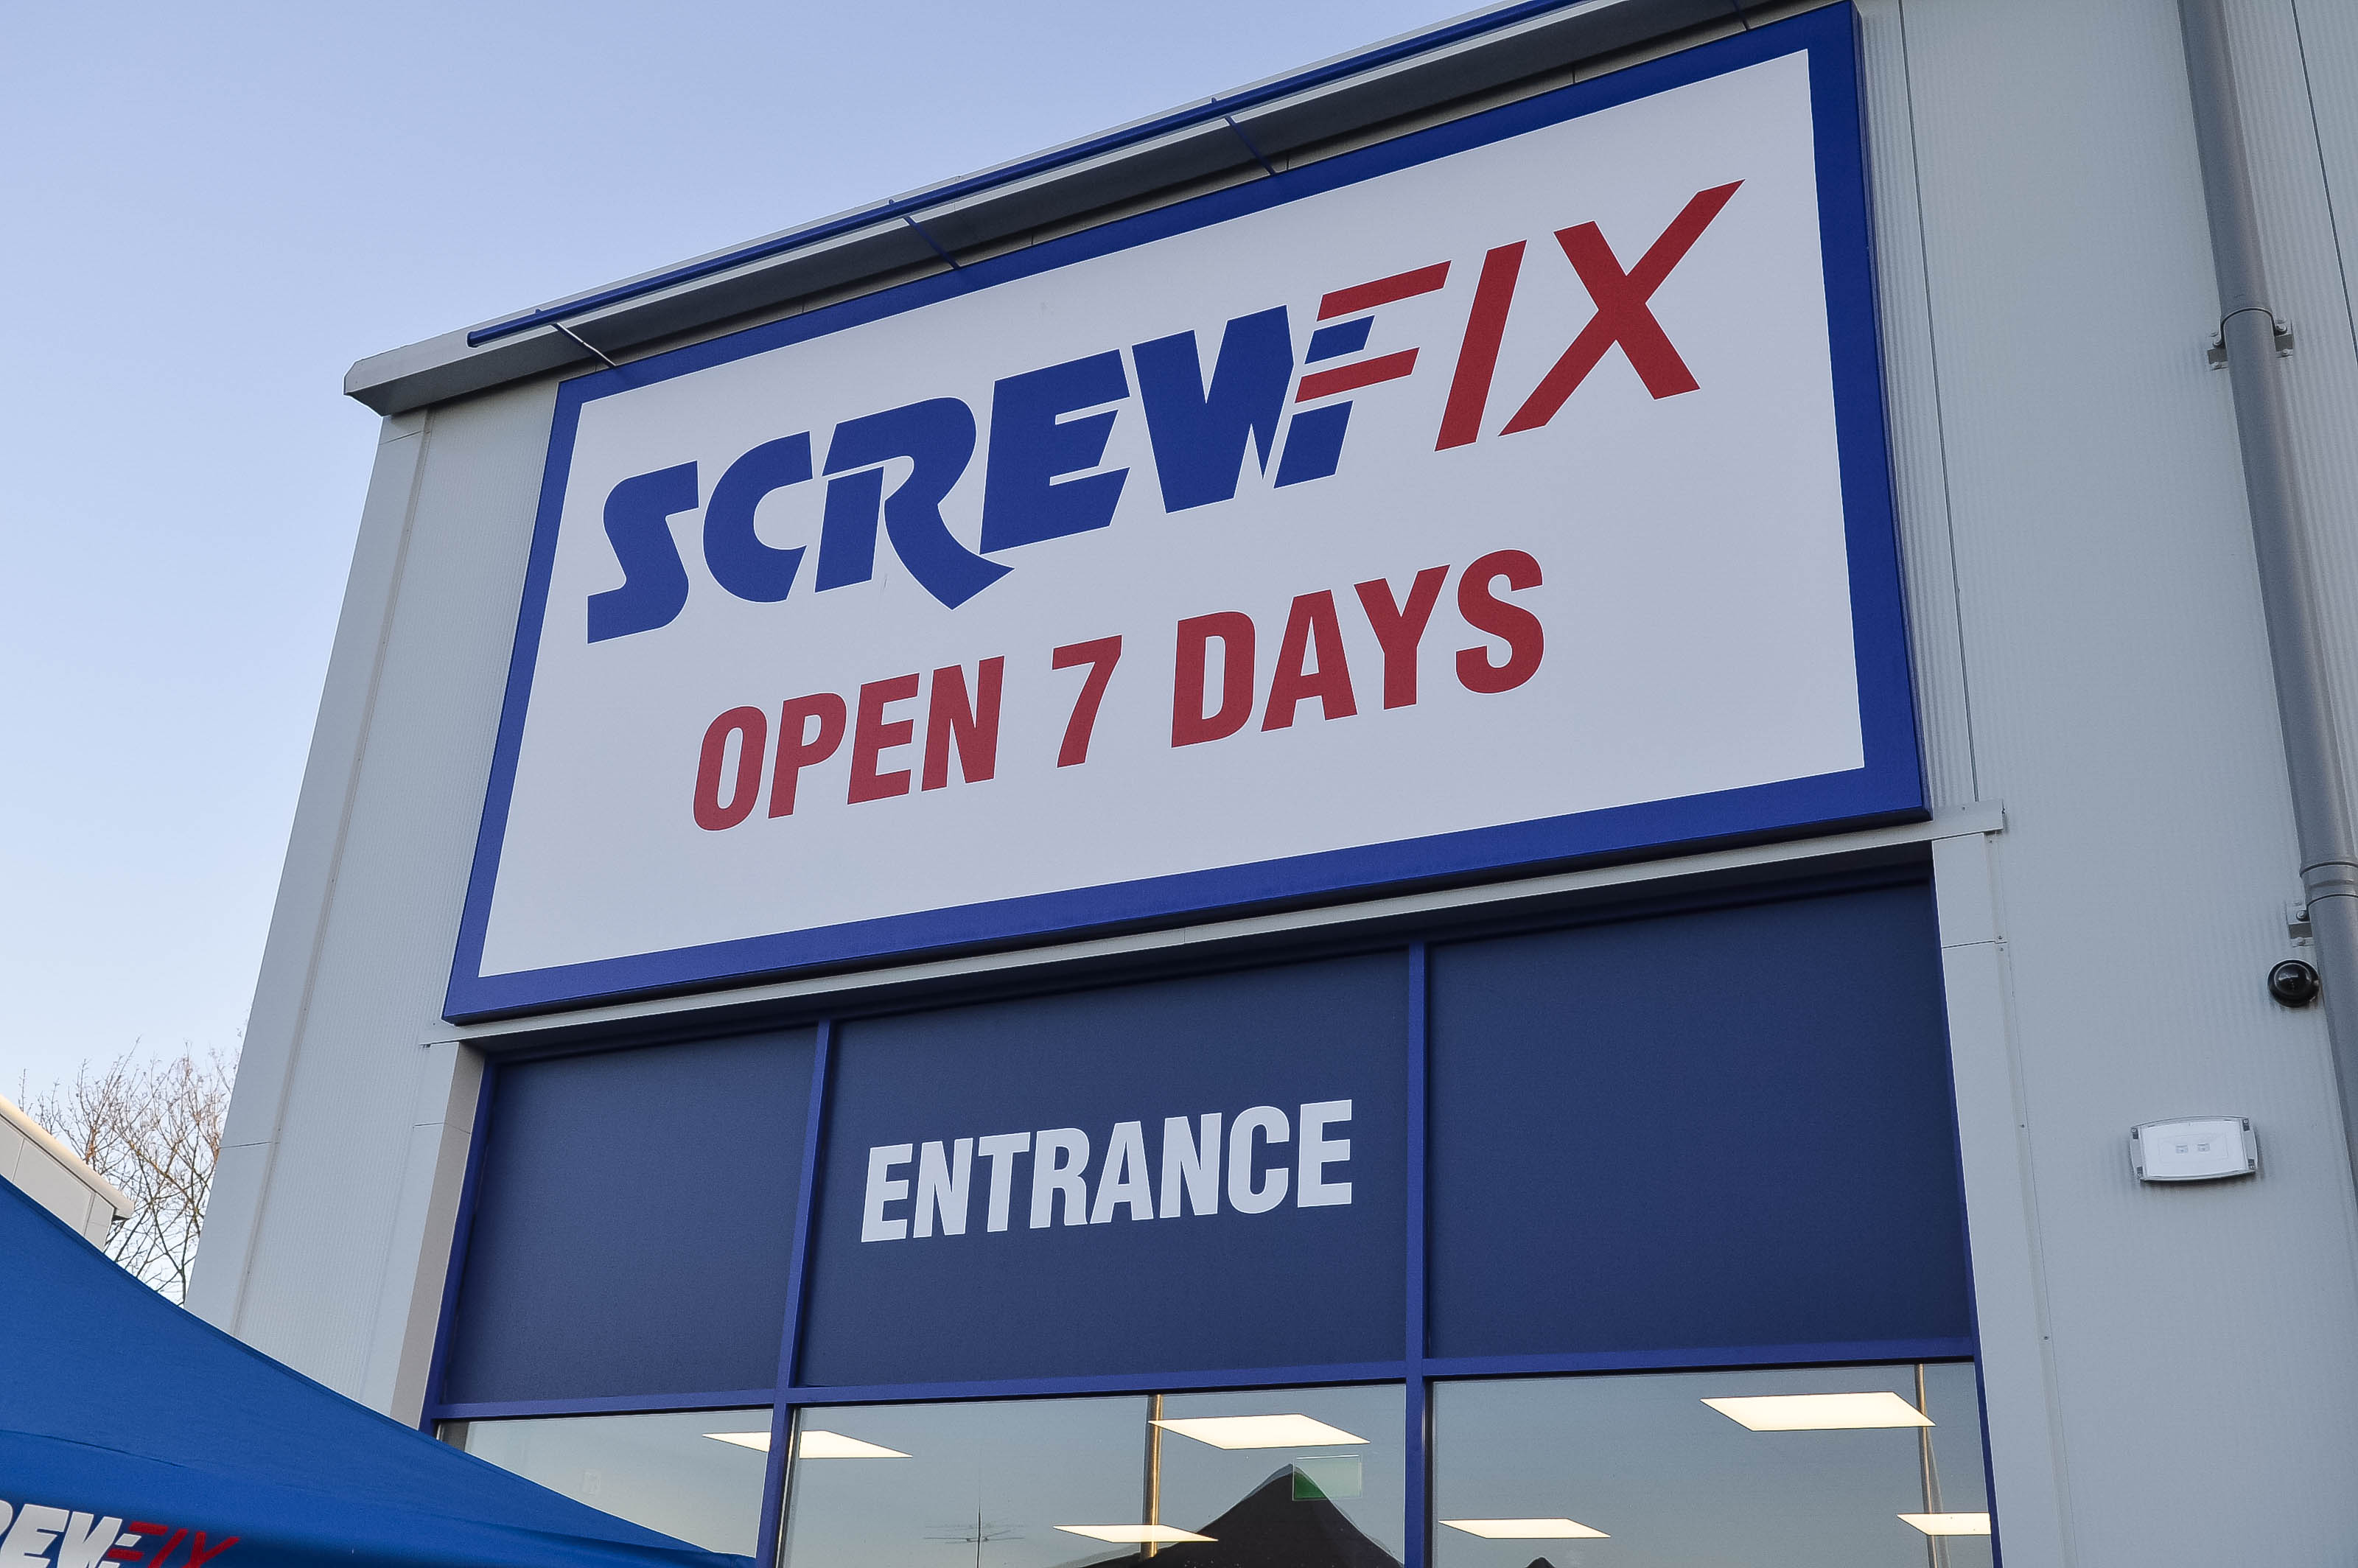 Coventrys’ Jobs Boost as Third Screwfix Store Opens